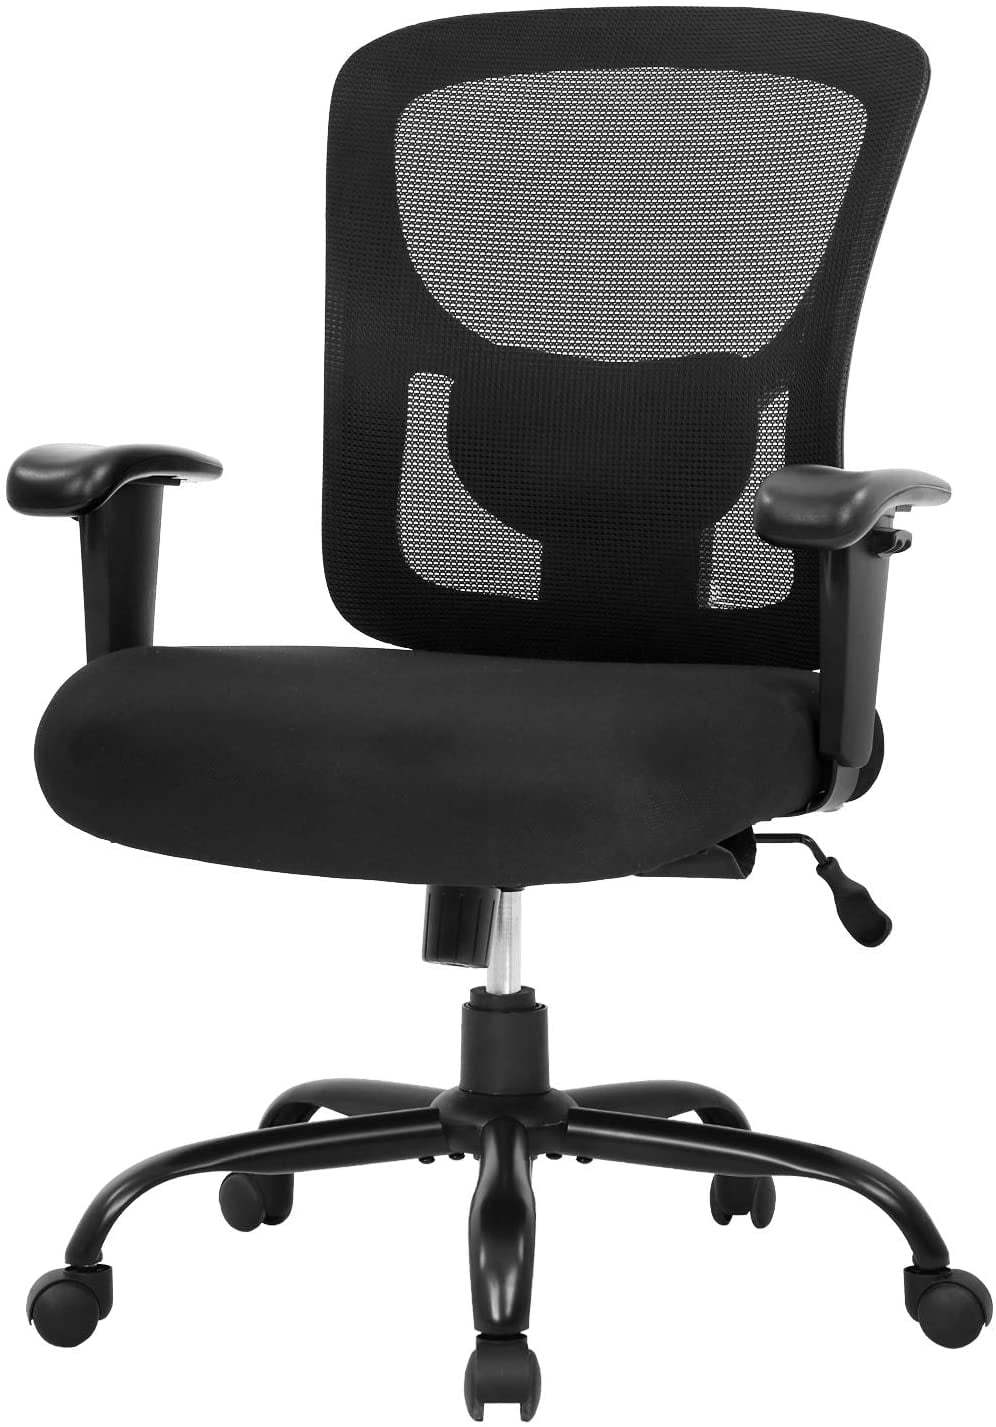 Multiple Colors-Black BLUERA Office Chair Ergonomic Desk Chair Mesh Computer Chair Swivel Chair with Back Lumbar Support 